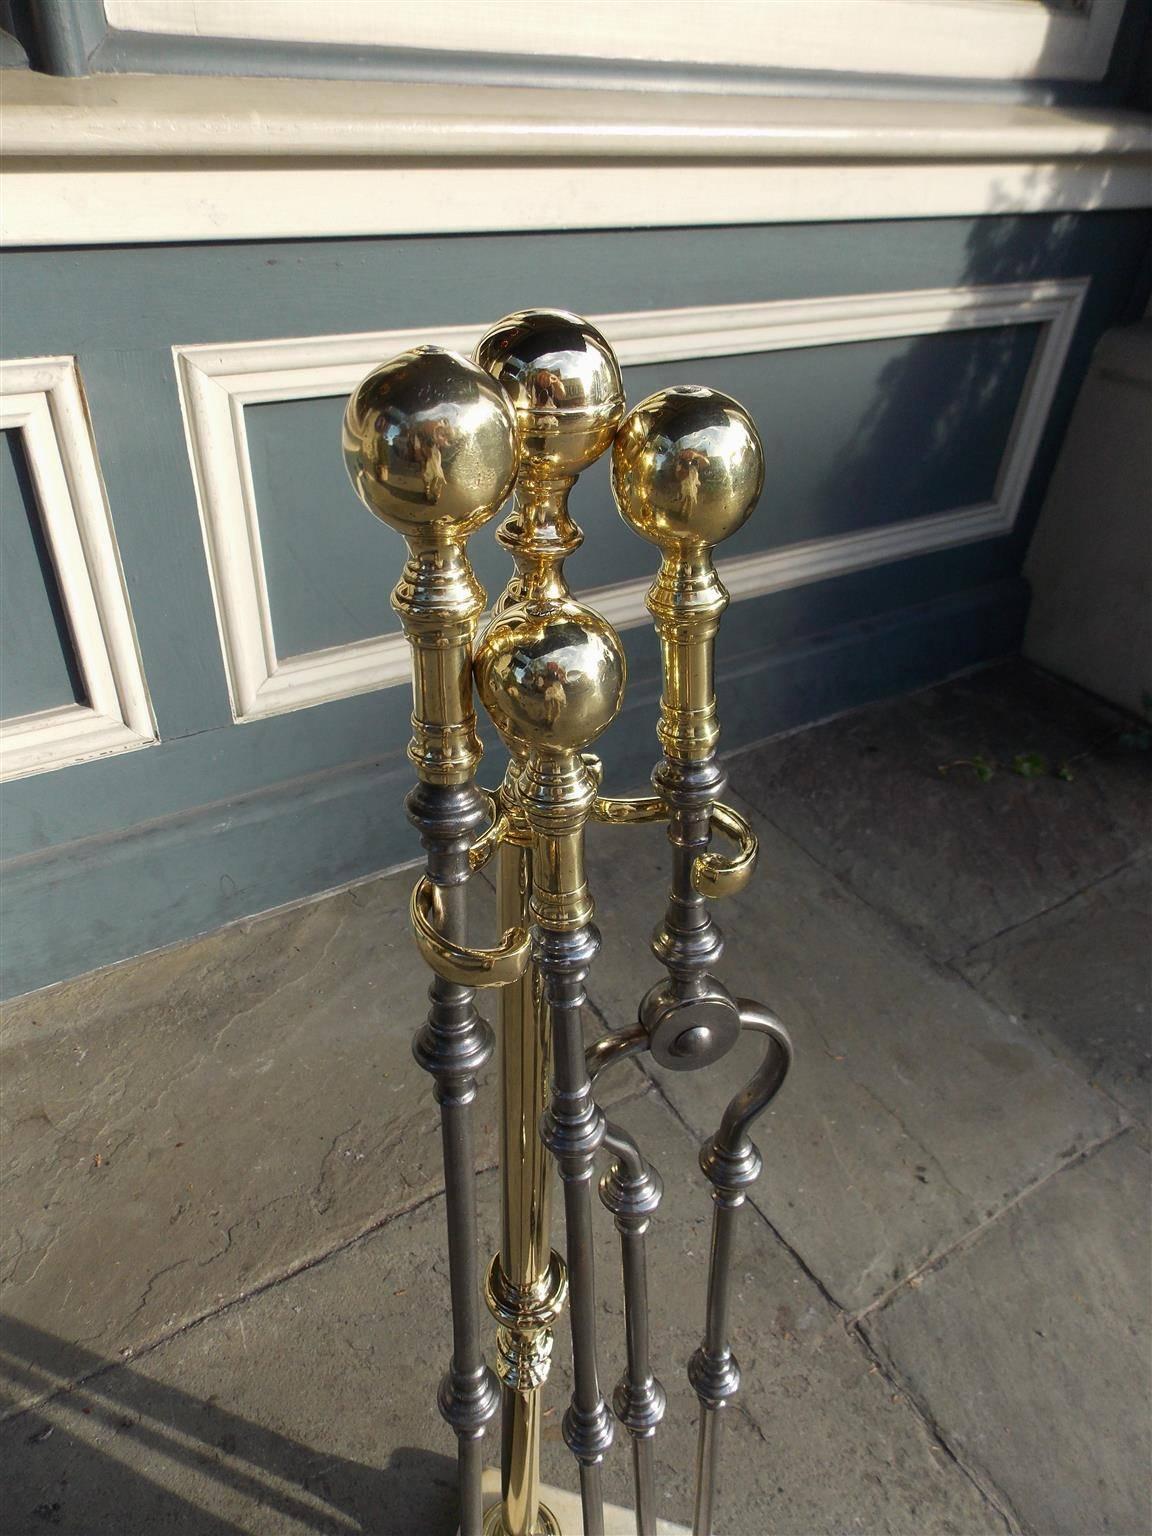 Cast Set of American Brass and Steel Fire Tools on Marble Stand, Boston, Circa 1810